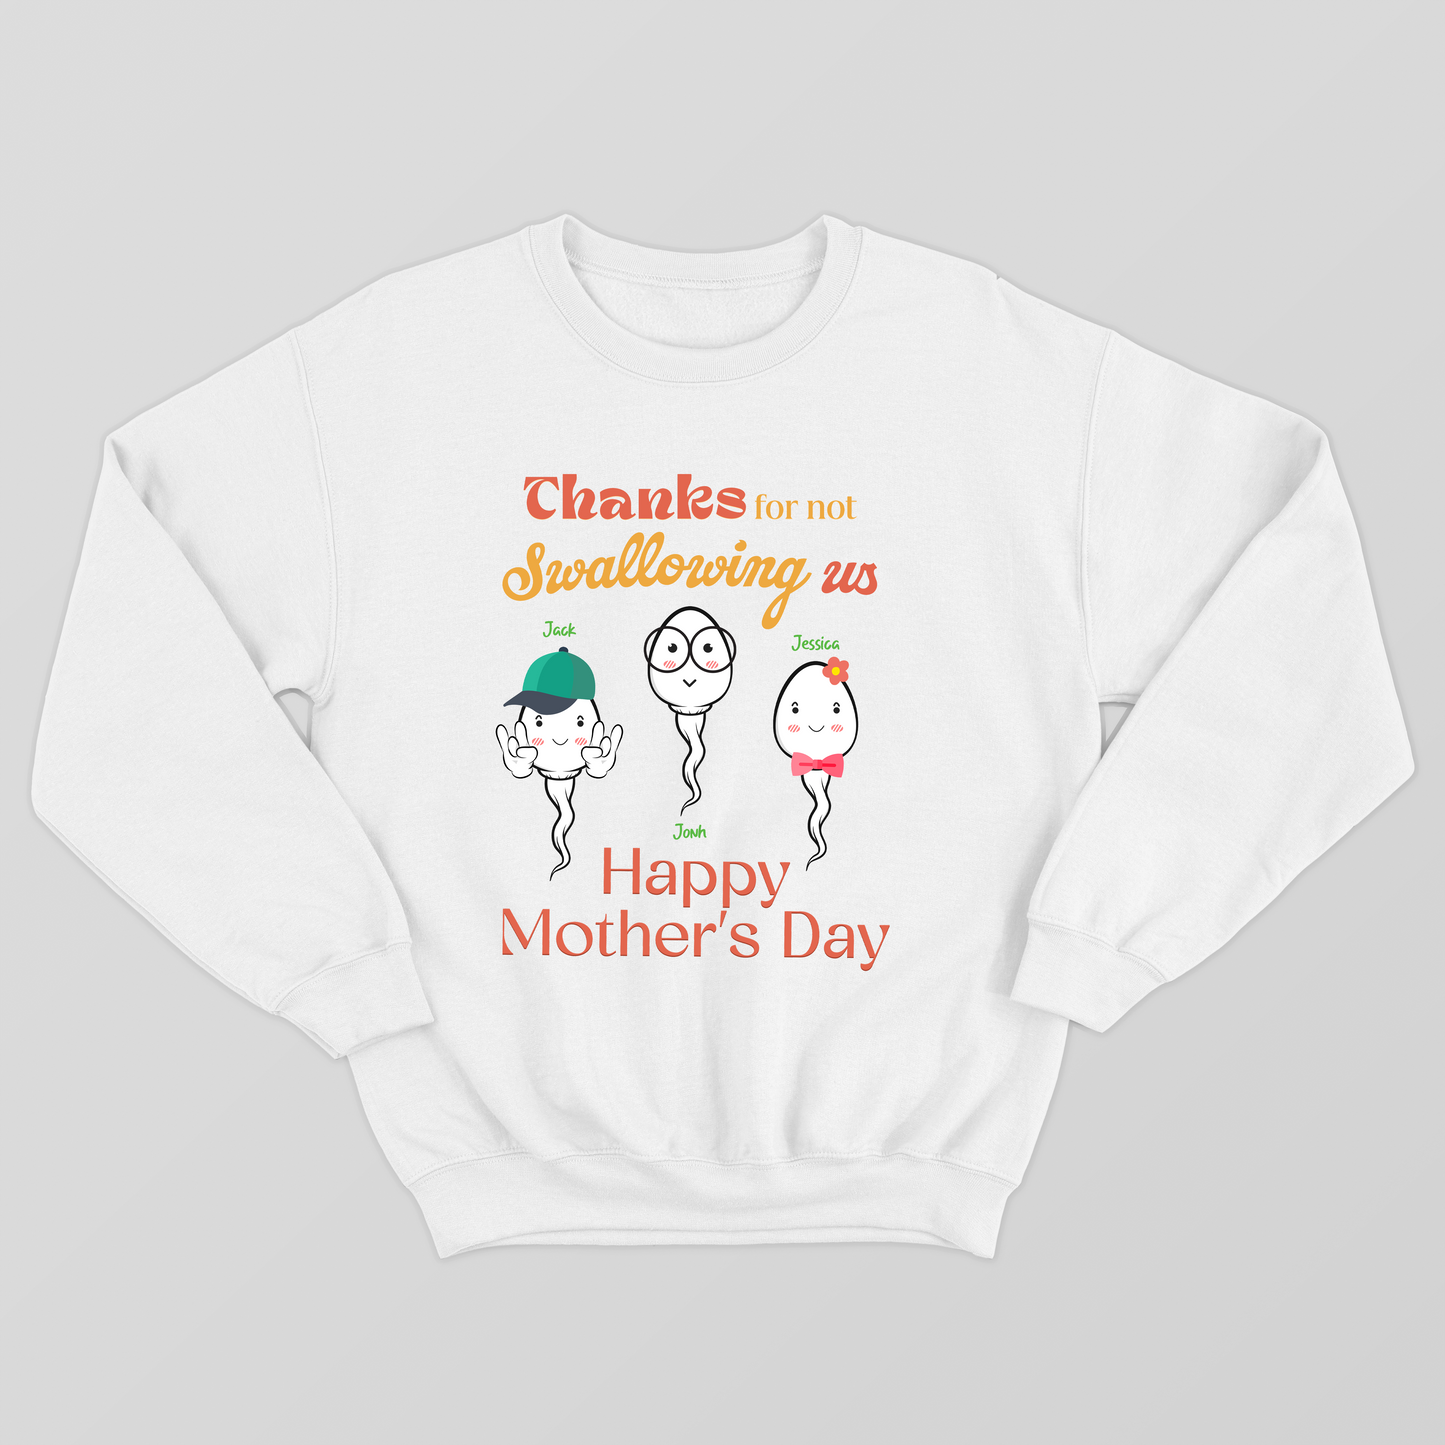 Customized Mother's Day Shirt, Personalized Thank You For Everything From The Ones You Didn't Swallow Shirt For Mom